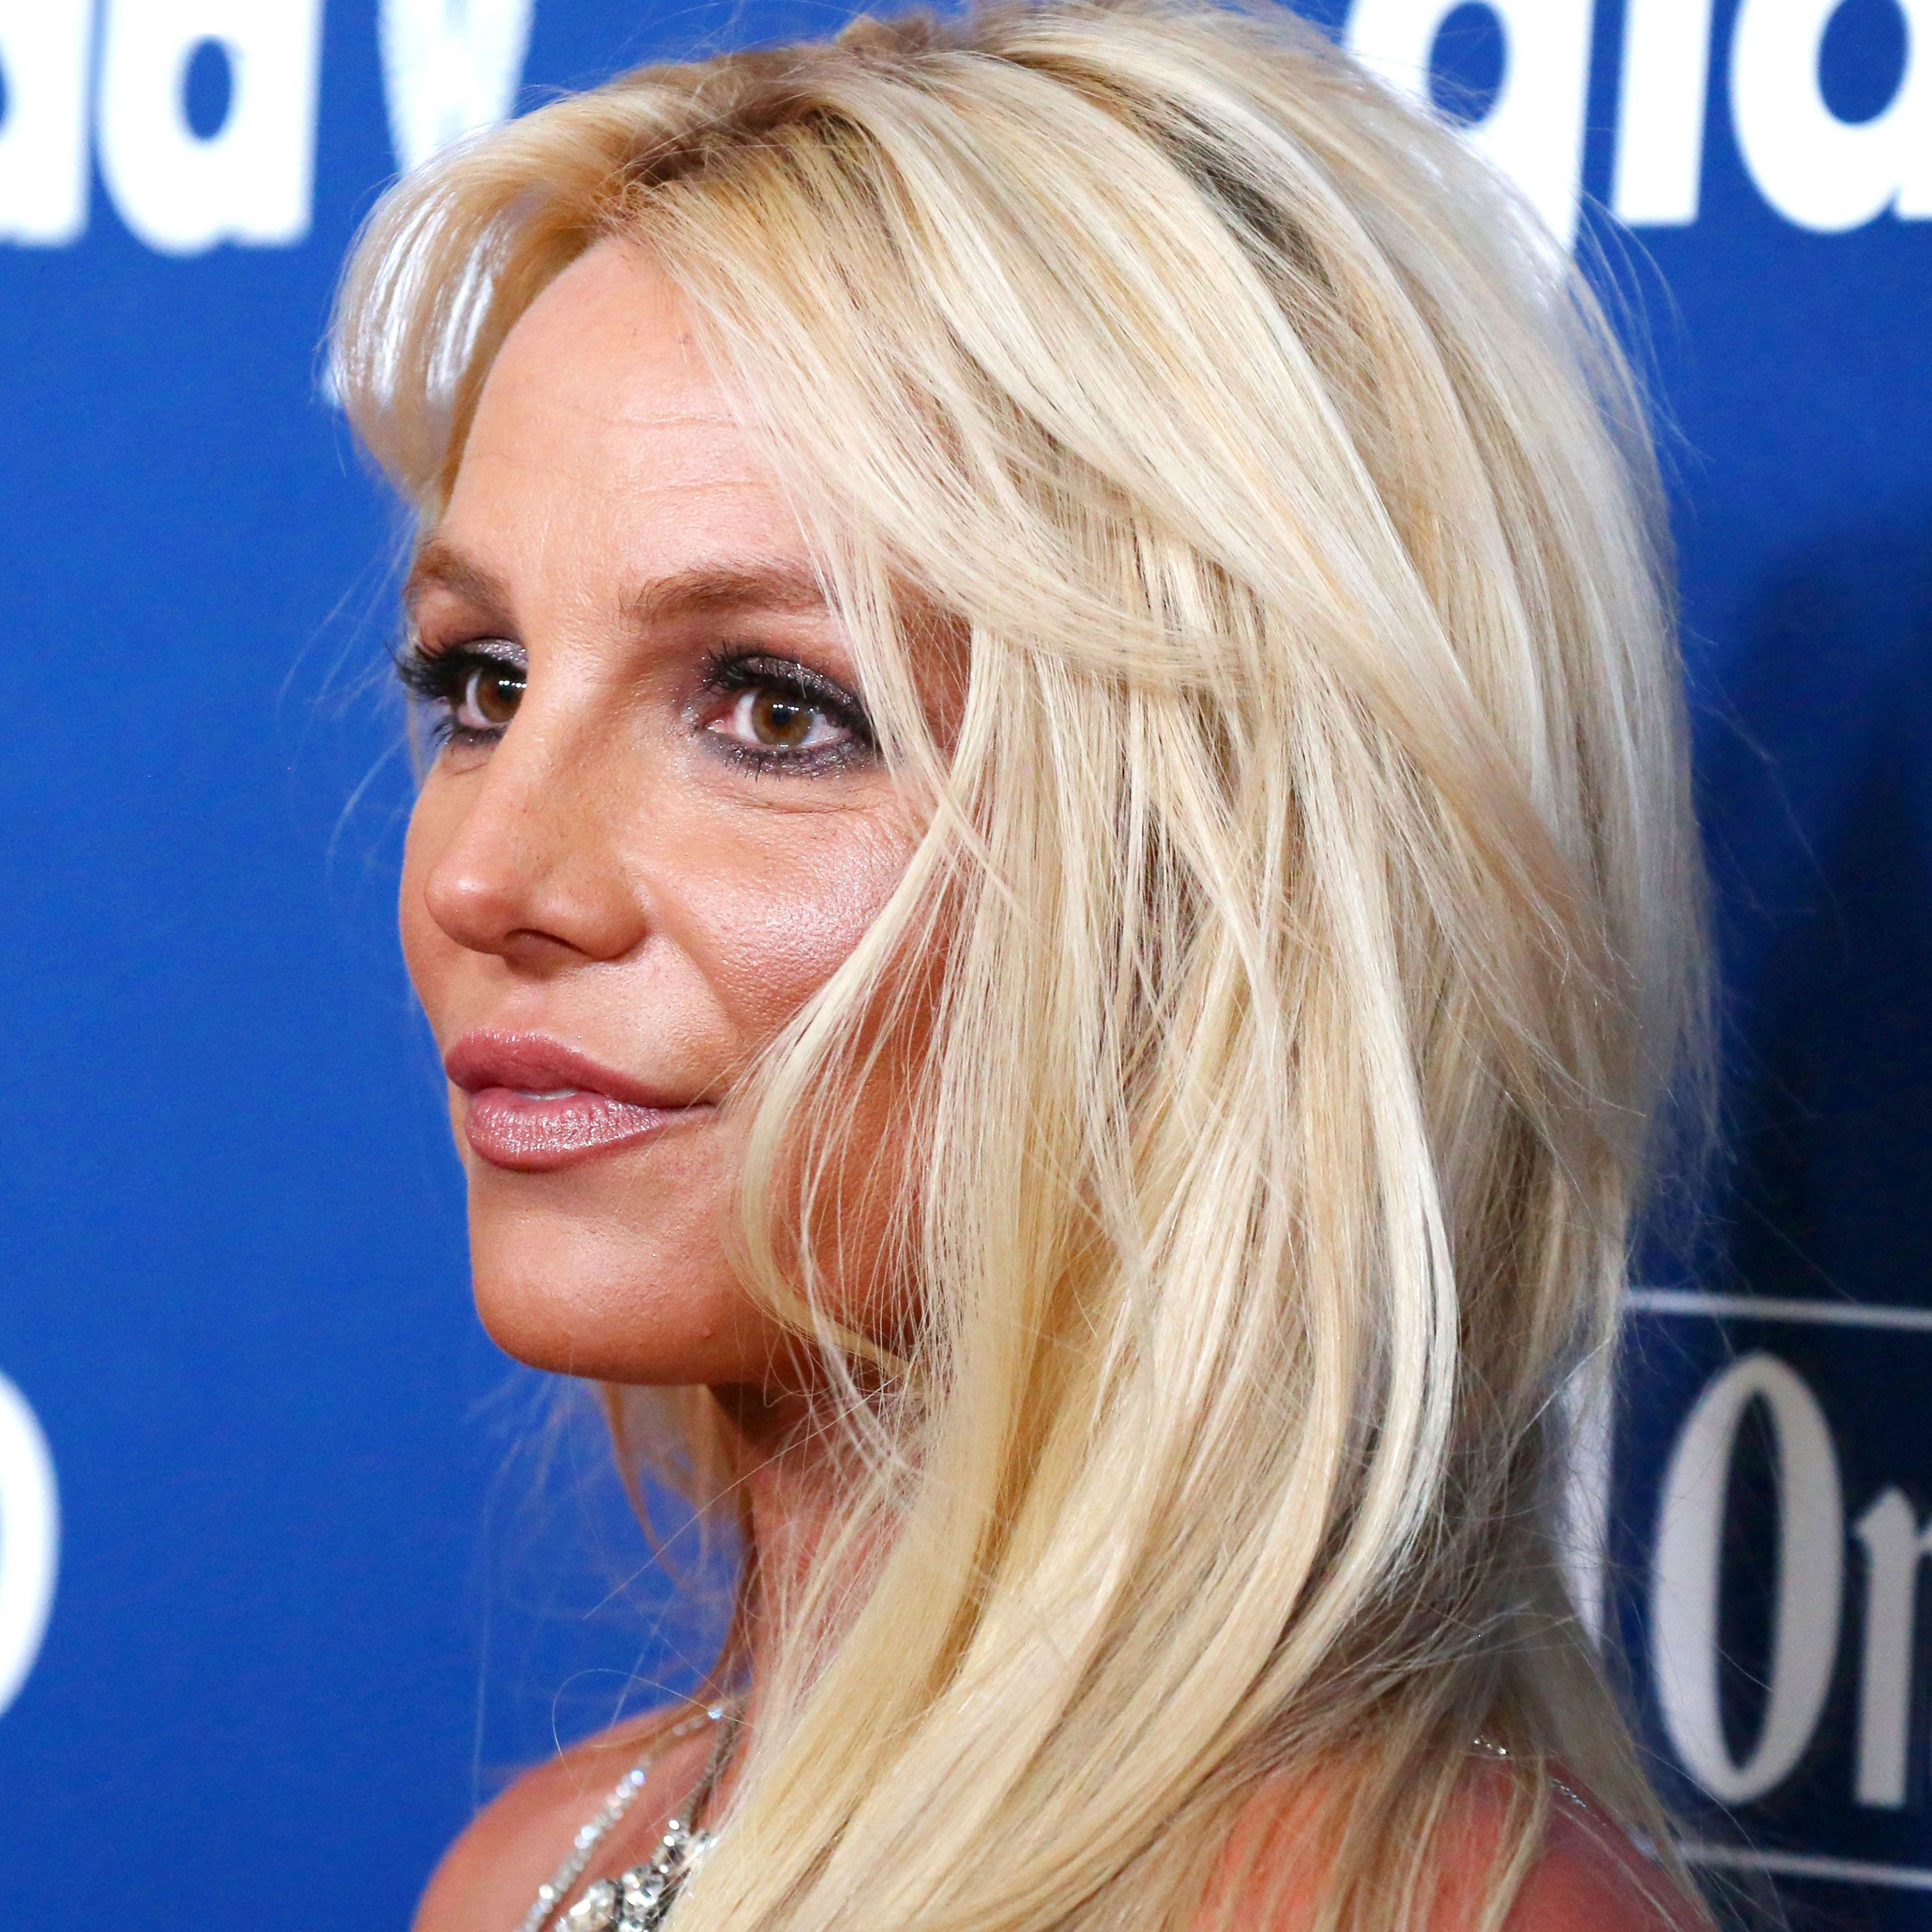 Britney Spears Accuses Dad of Financial Misconduct, Spying pic